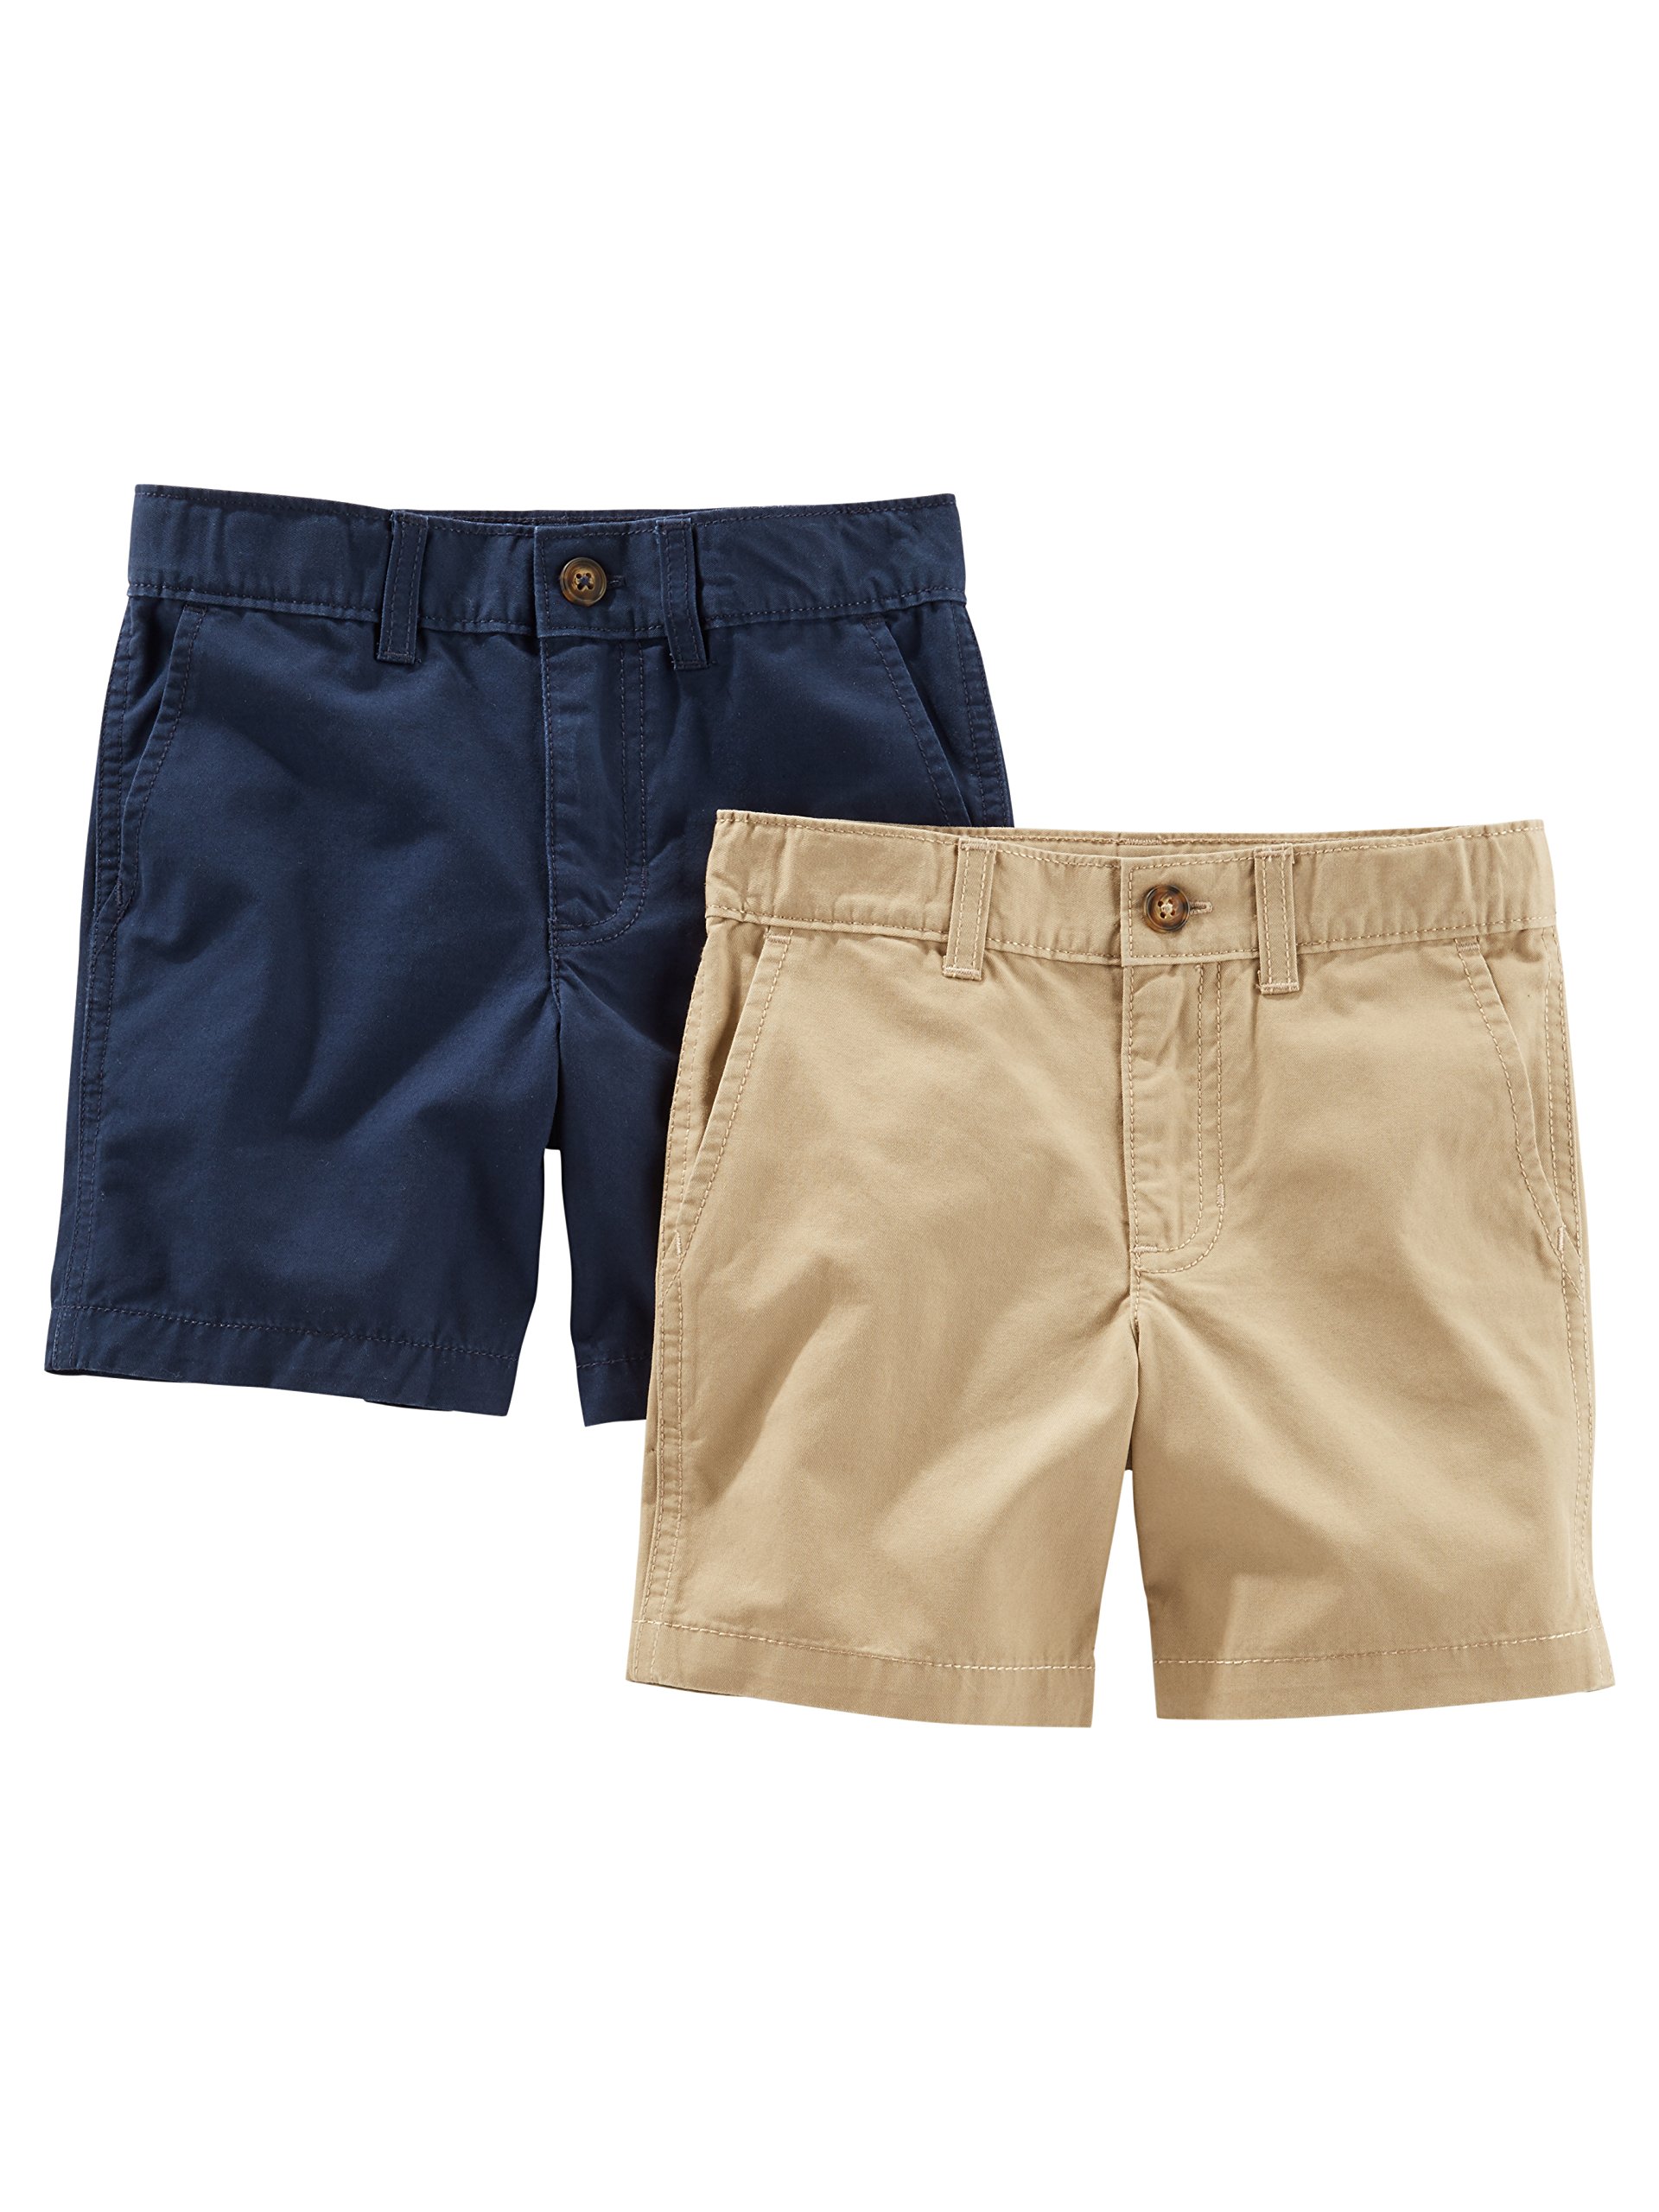 Simple Joys by Carter's Toddler Boys' Flat Front Shorts, Pack of 2